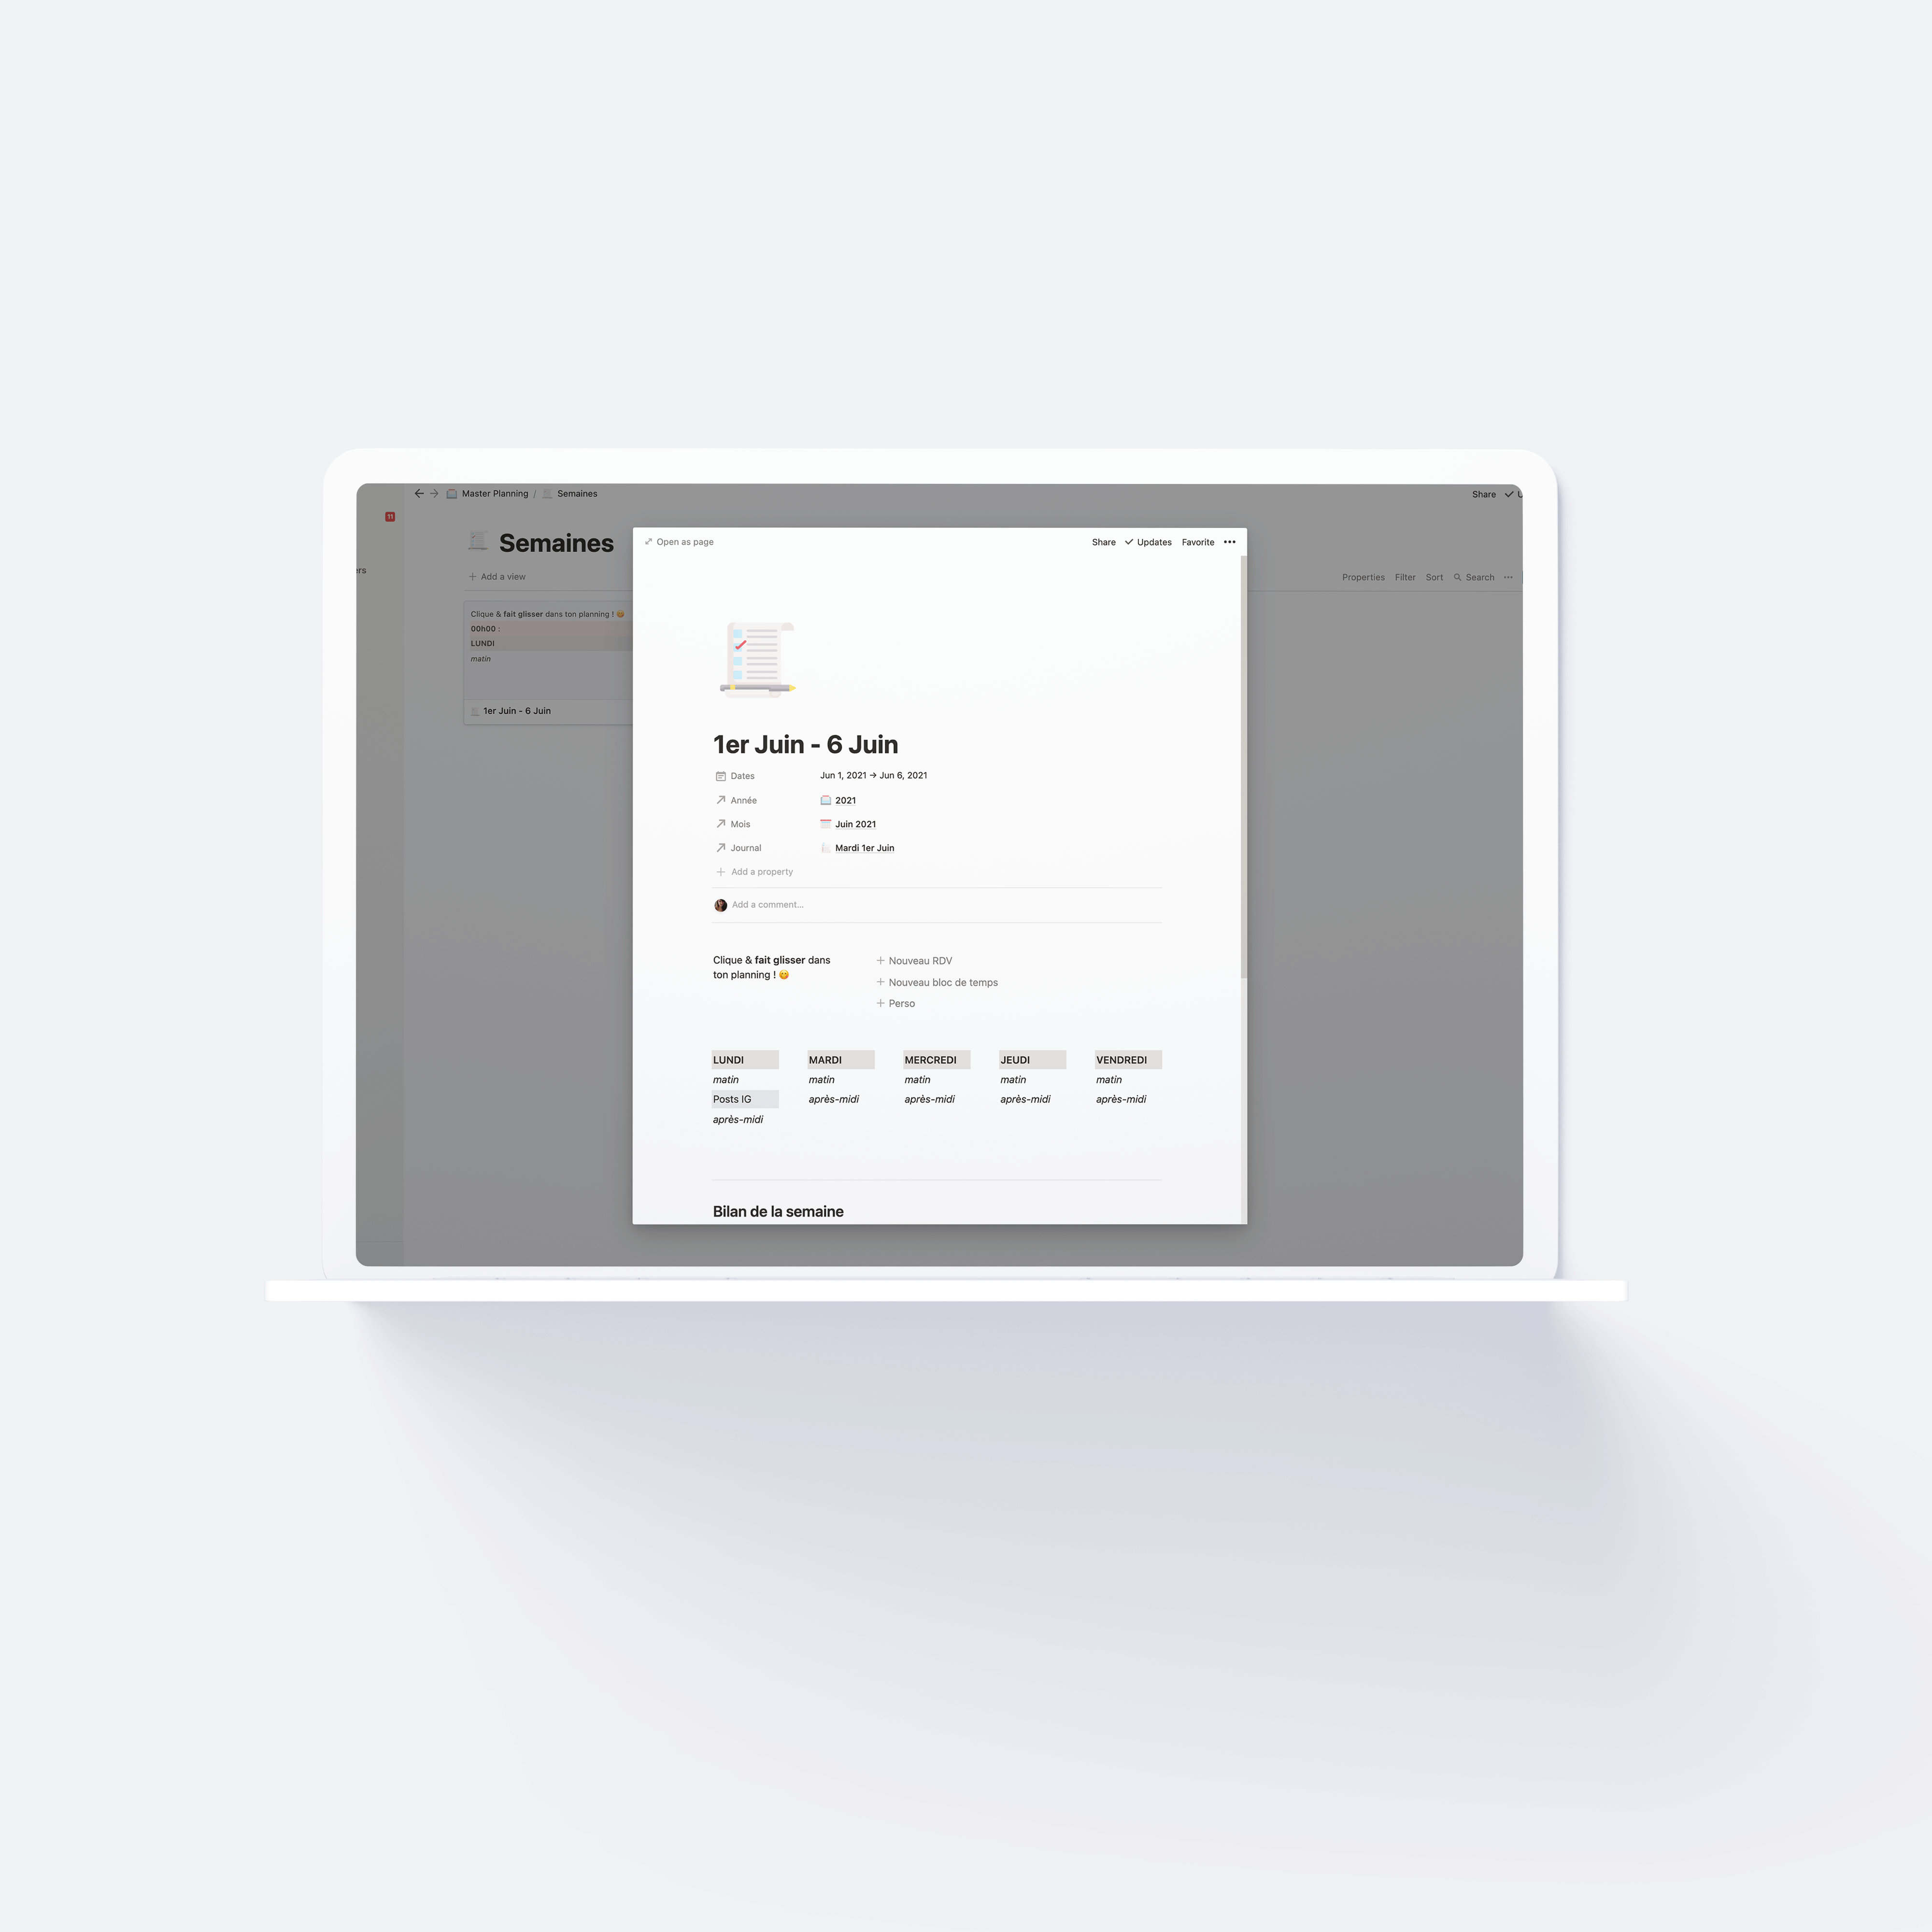 Notion template